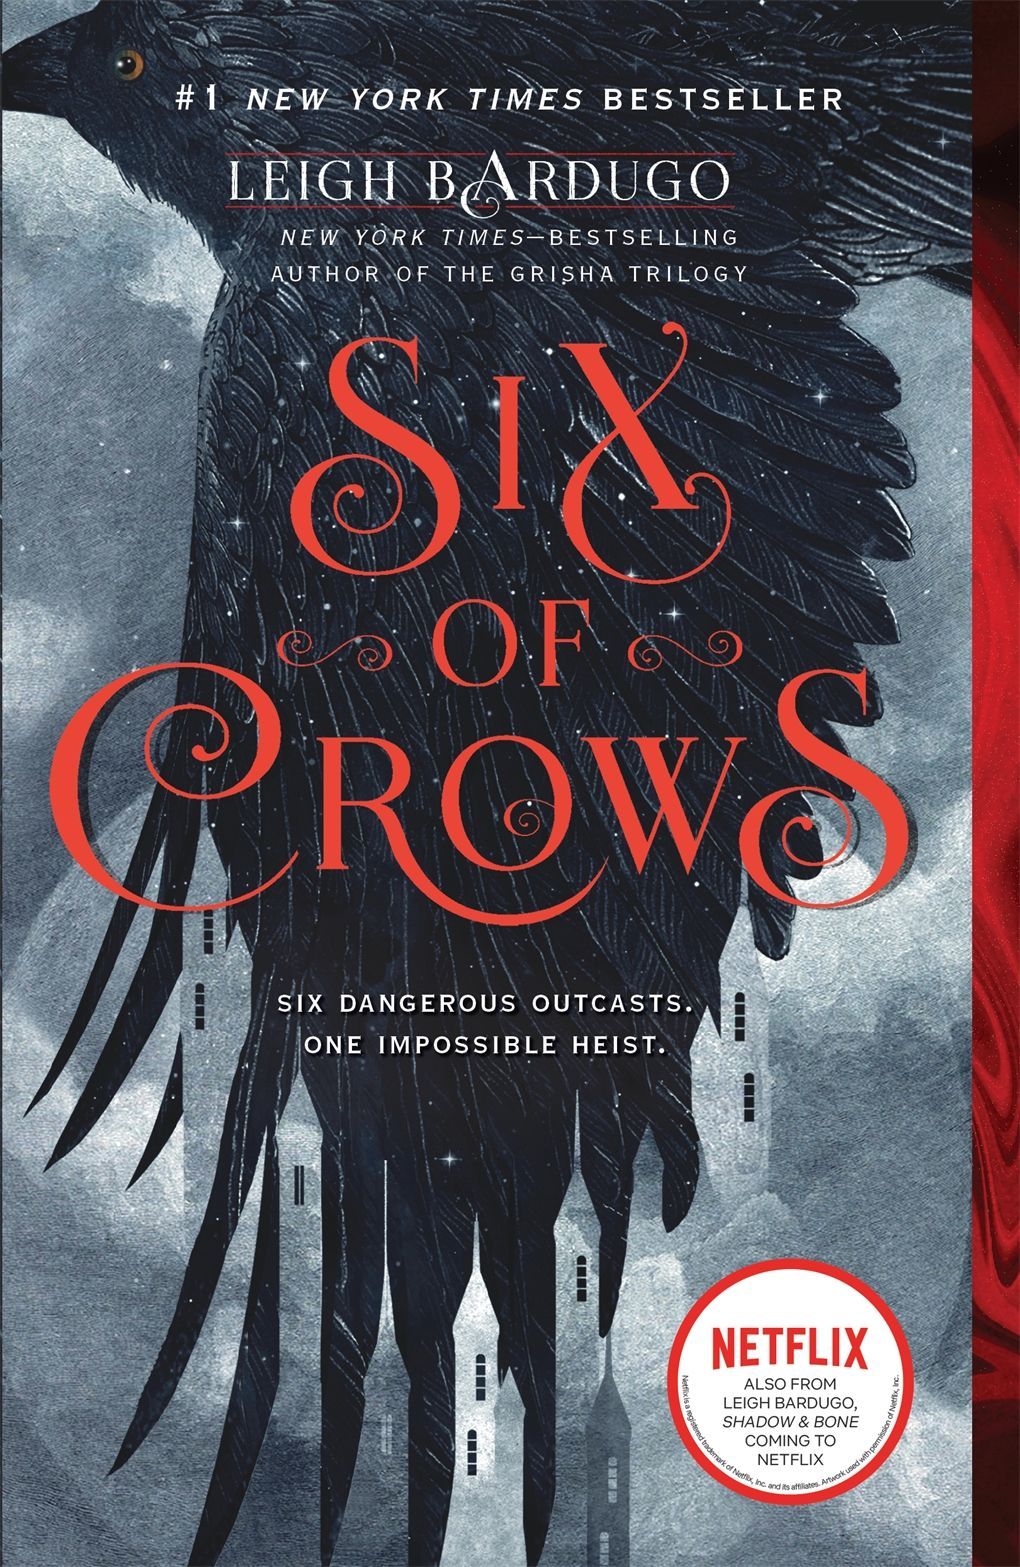 "Six of Crows"